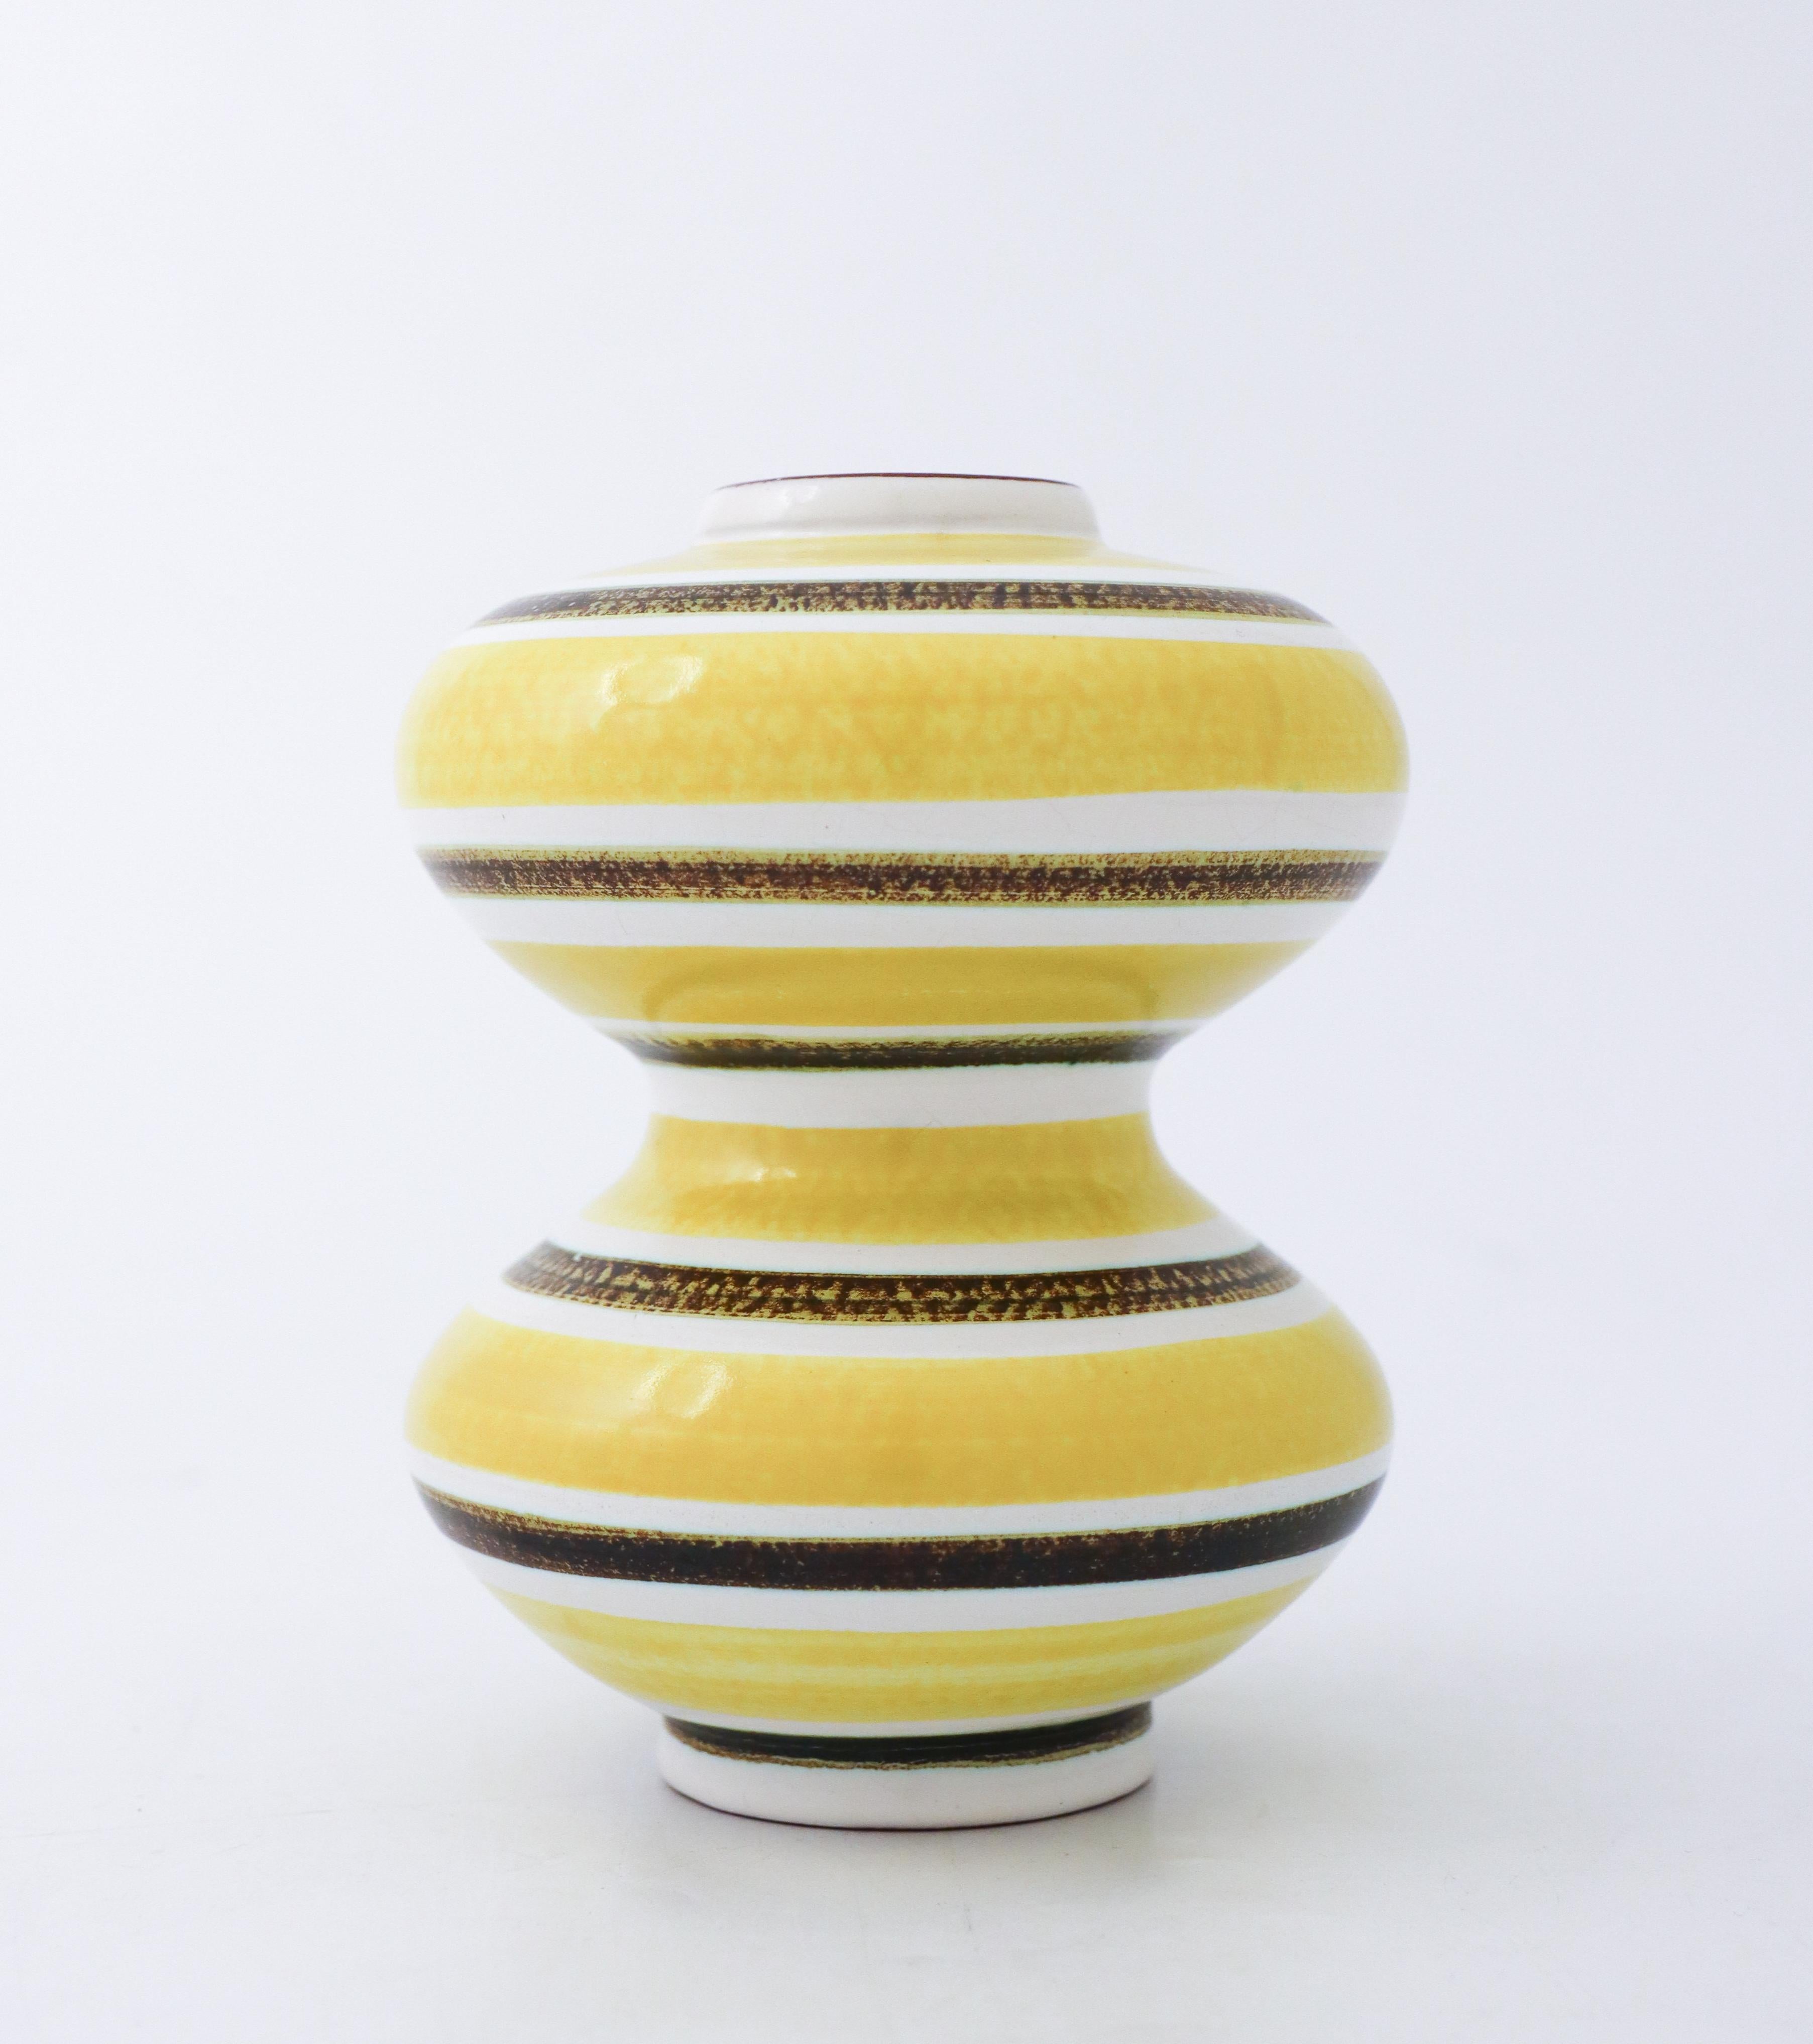 Yellow Vase Faience, Stig Lindberg, Gustavsbergs Studio - Mid-20th Century In Excellent Condition For Sale In Stockholm, SE